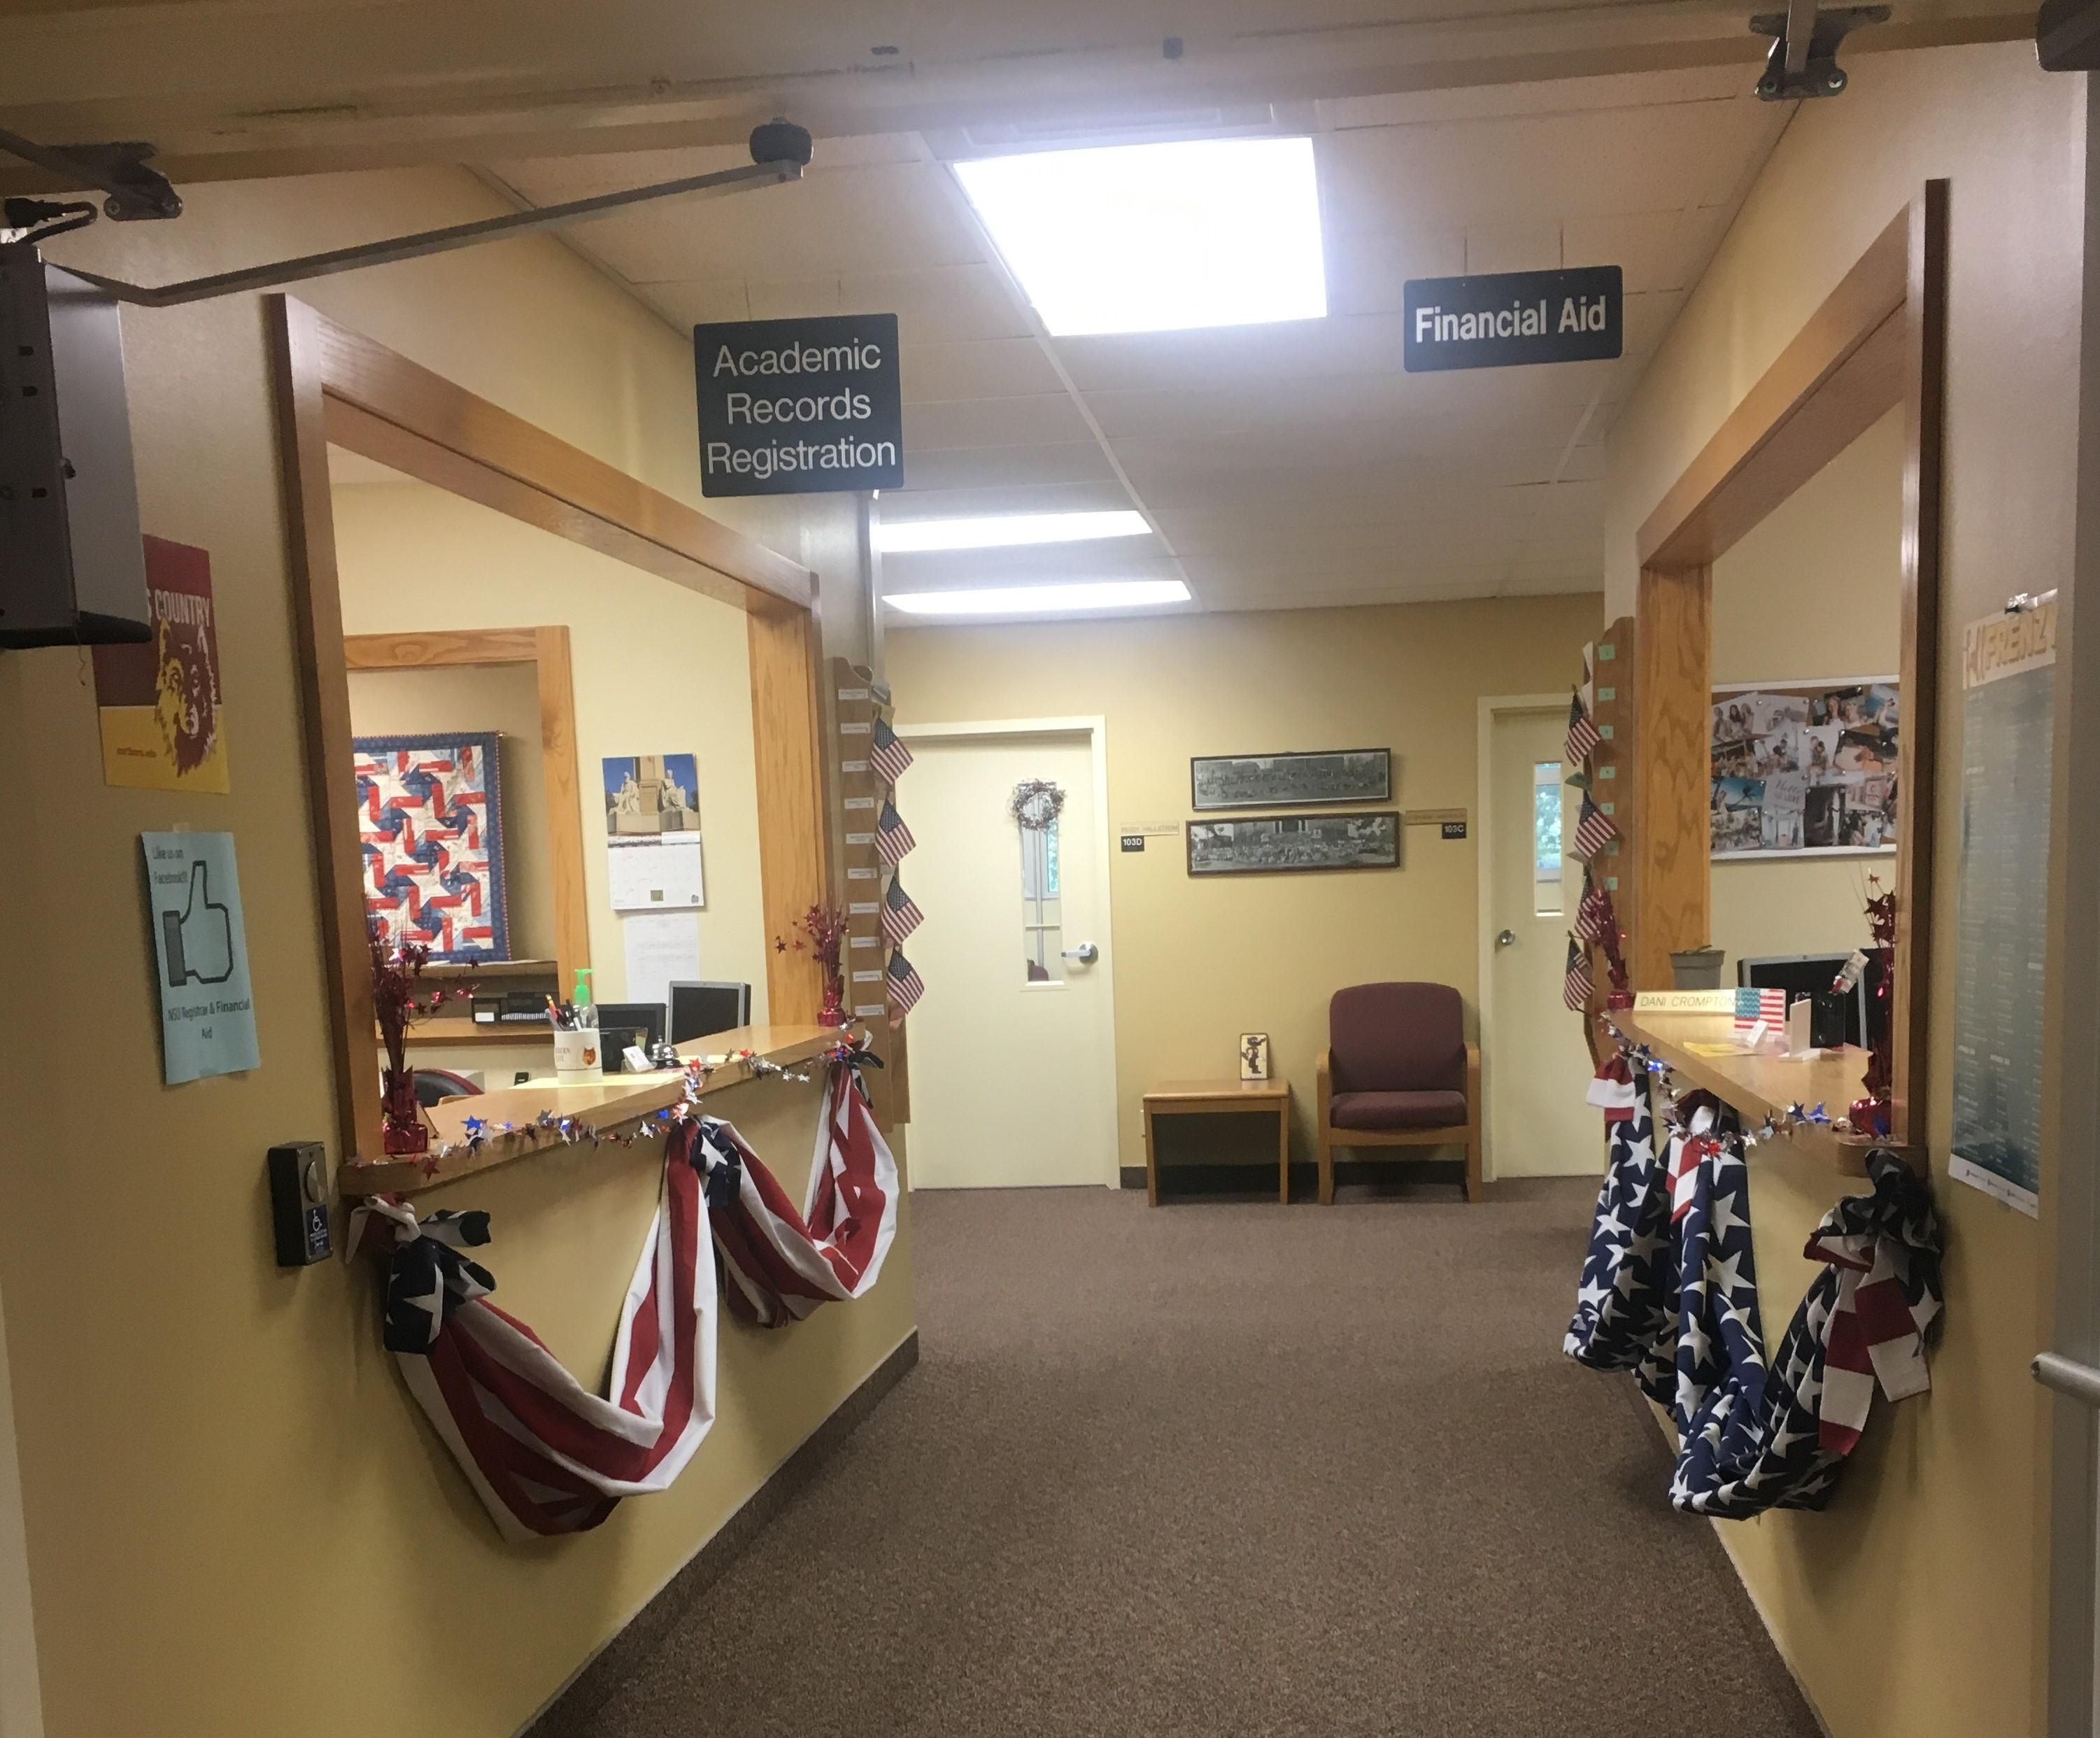 Hallway decorated with American banners